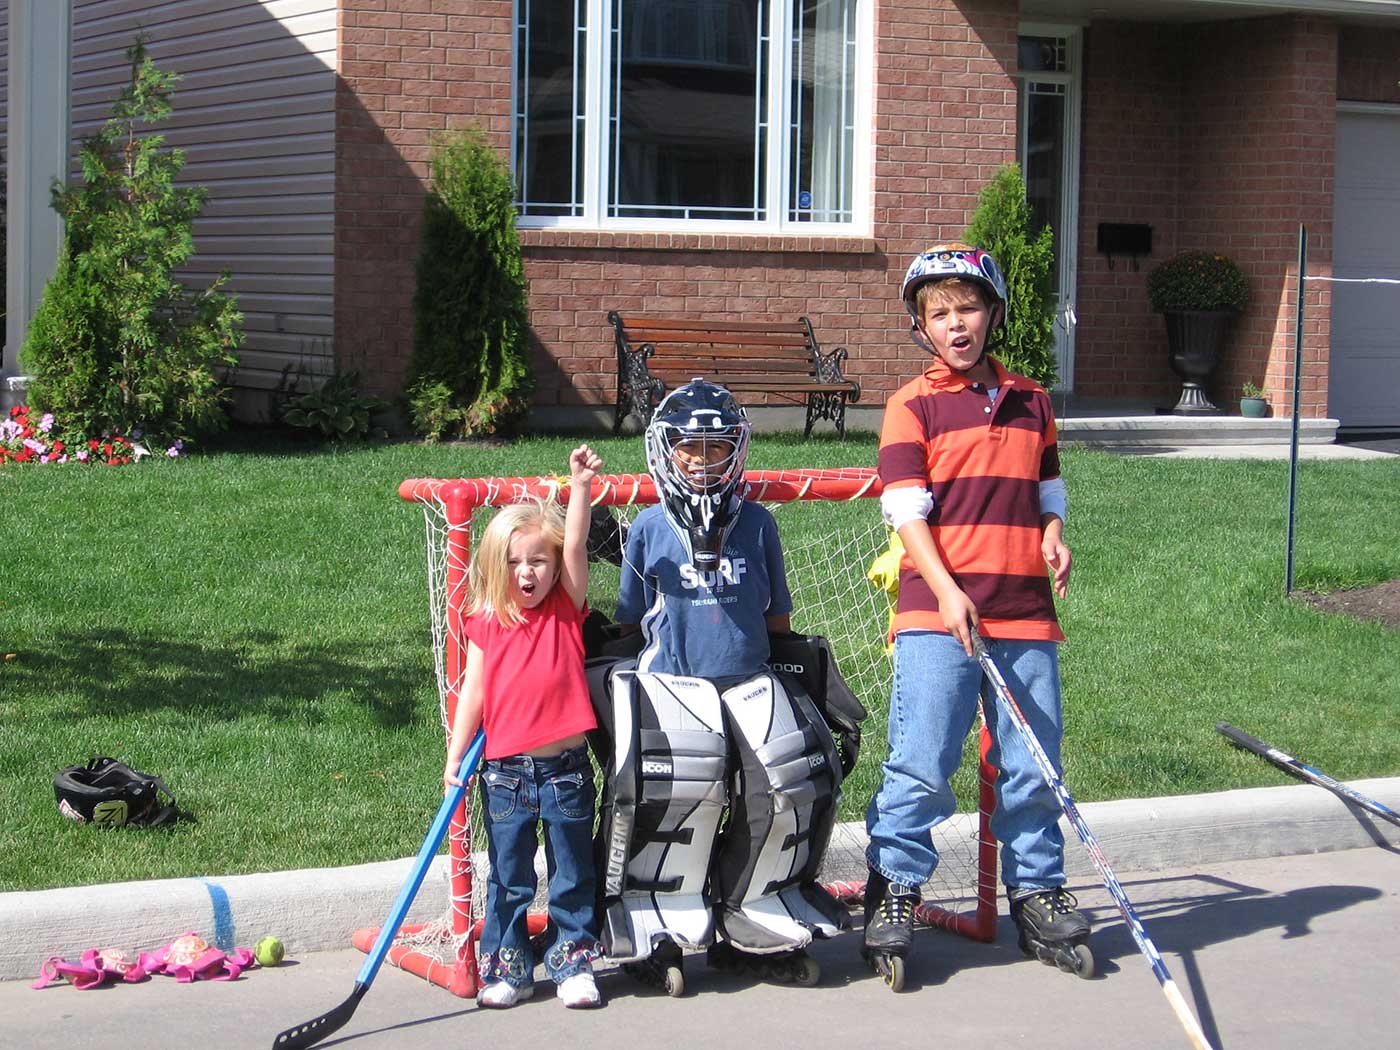 three young children are posed in front of a street hockey goal